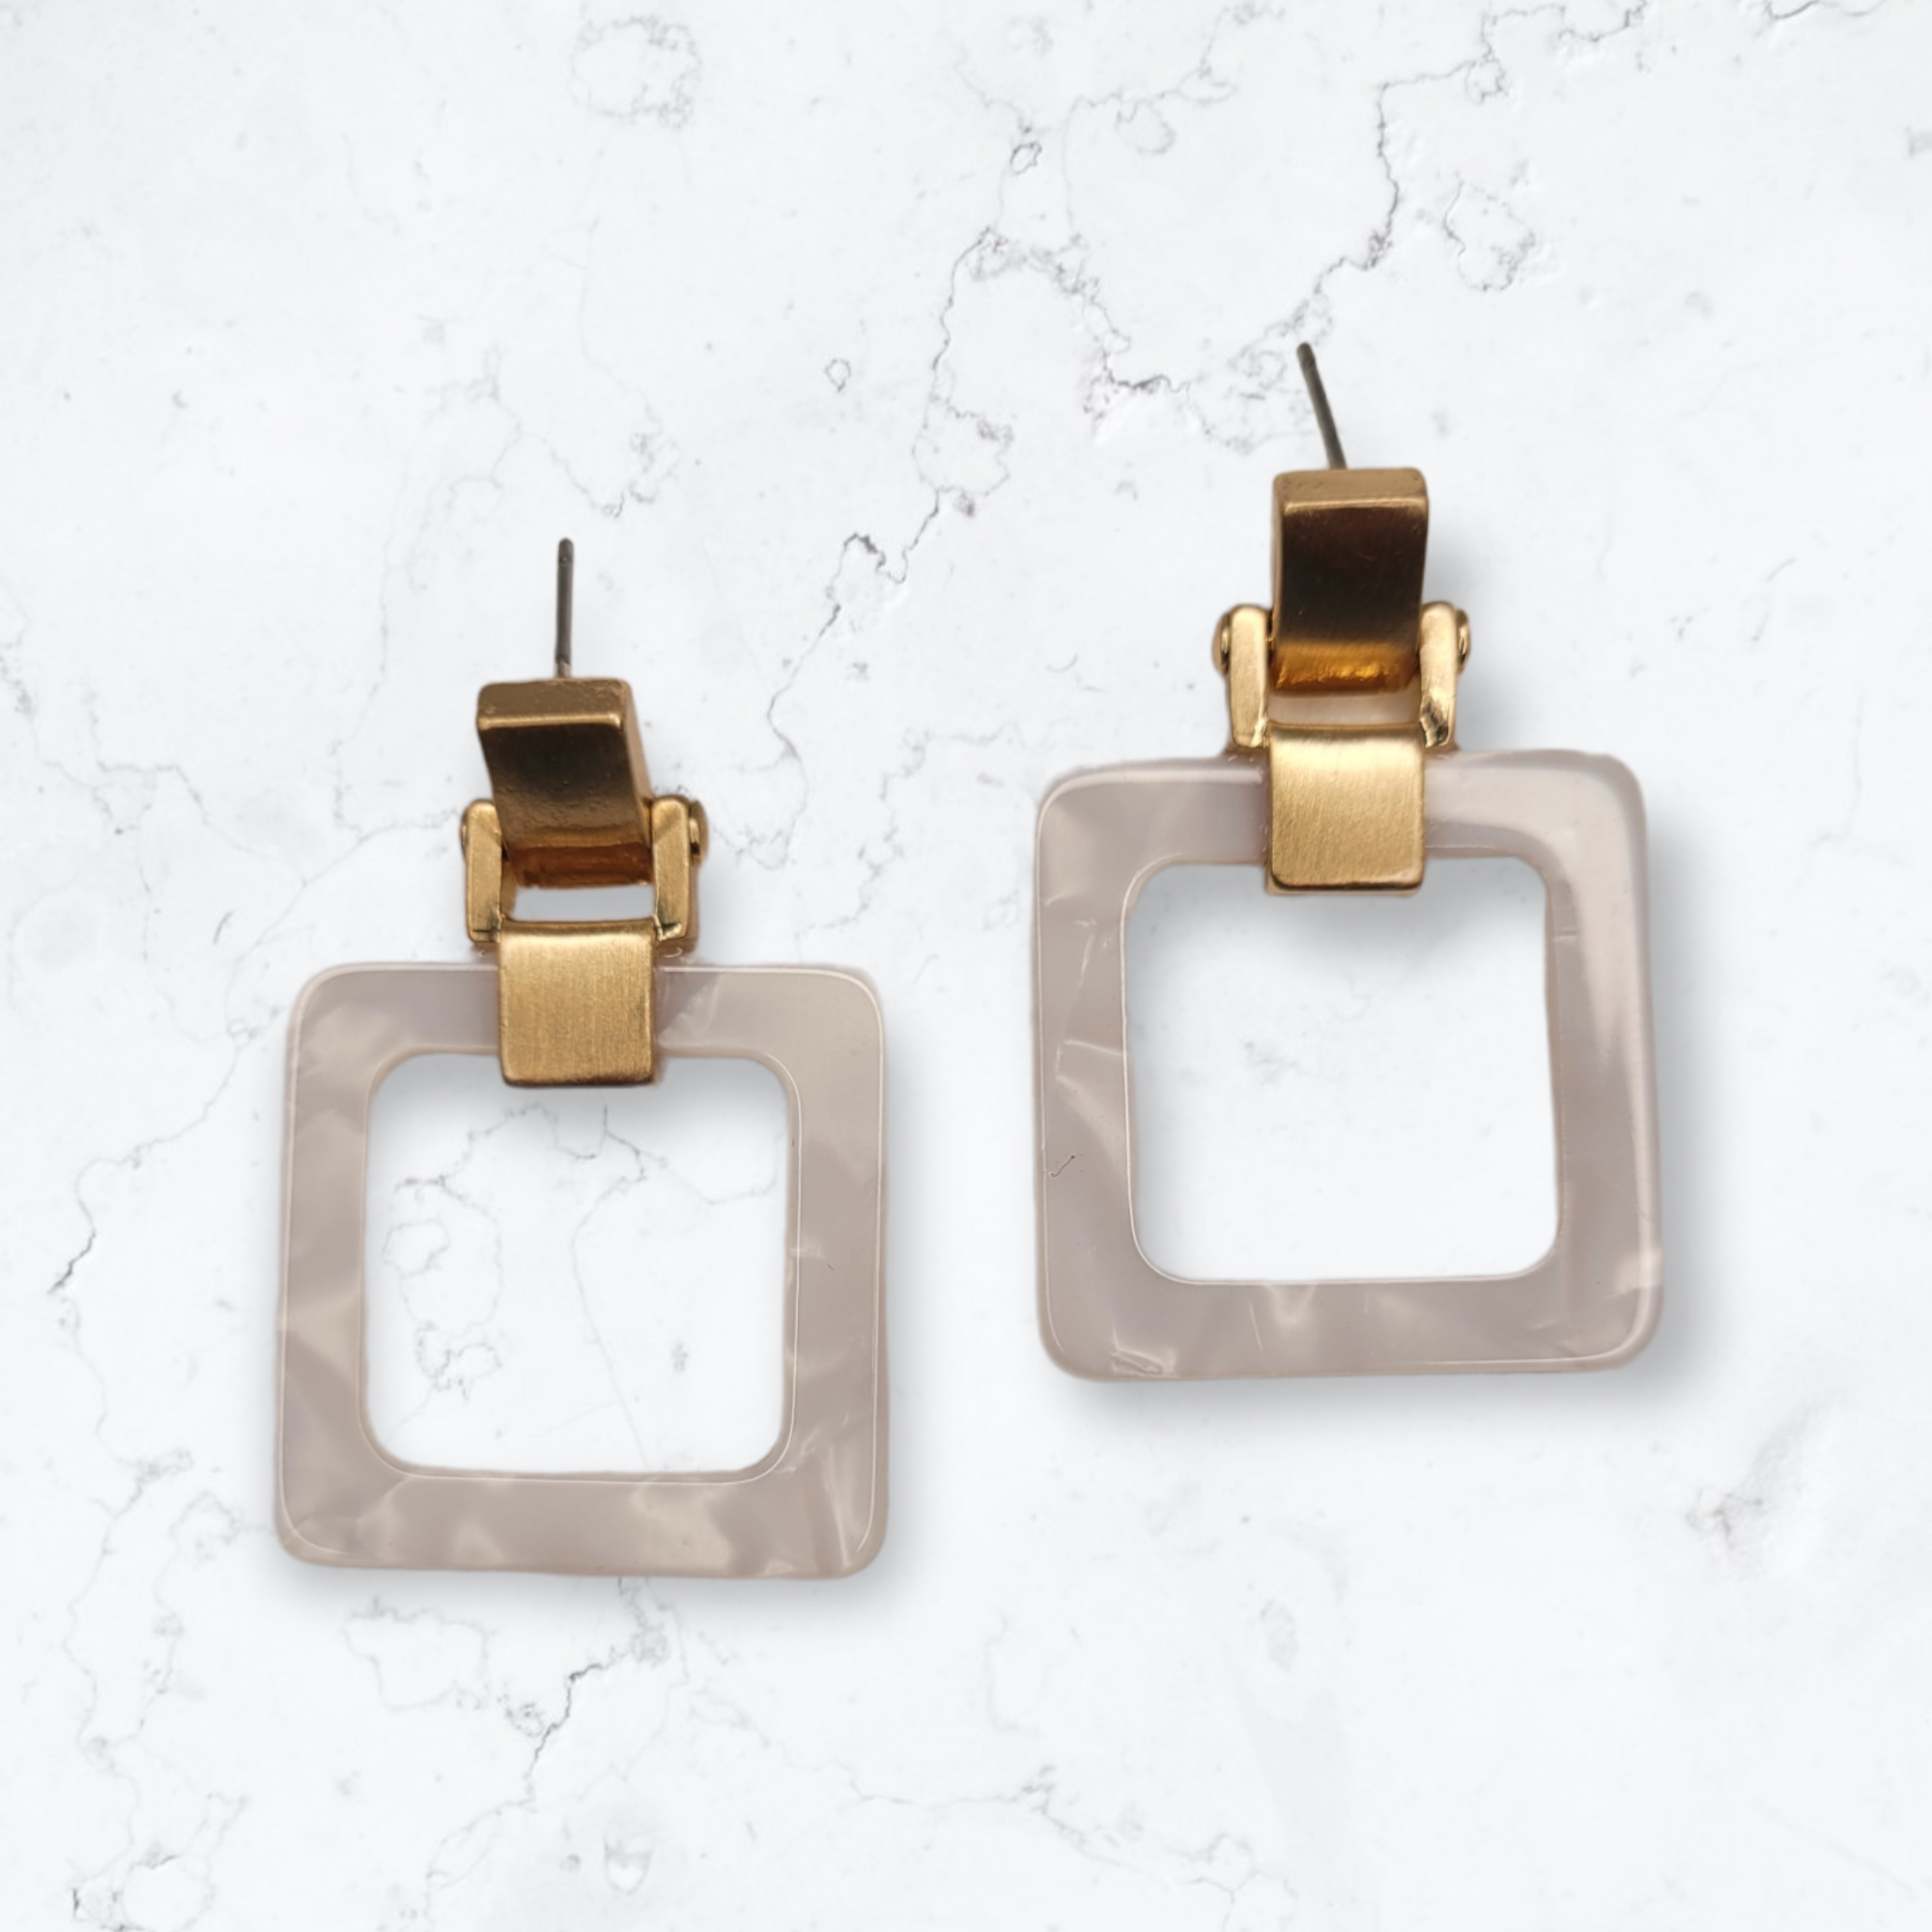 Pearl White Square Acrylic Earrings-Earrings-LouisGeorge Boutique-LouisGeorge Boutique, Women’s Fashion Boutique Located in Trussville, Alabama